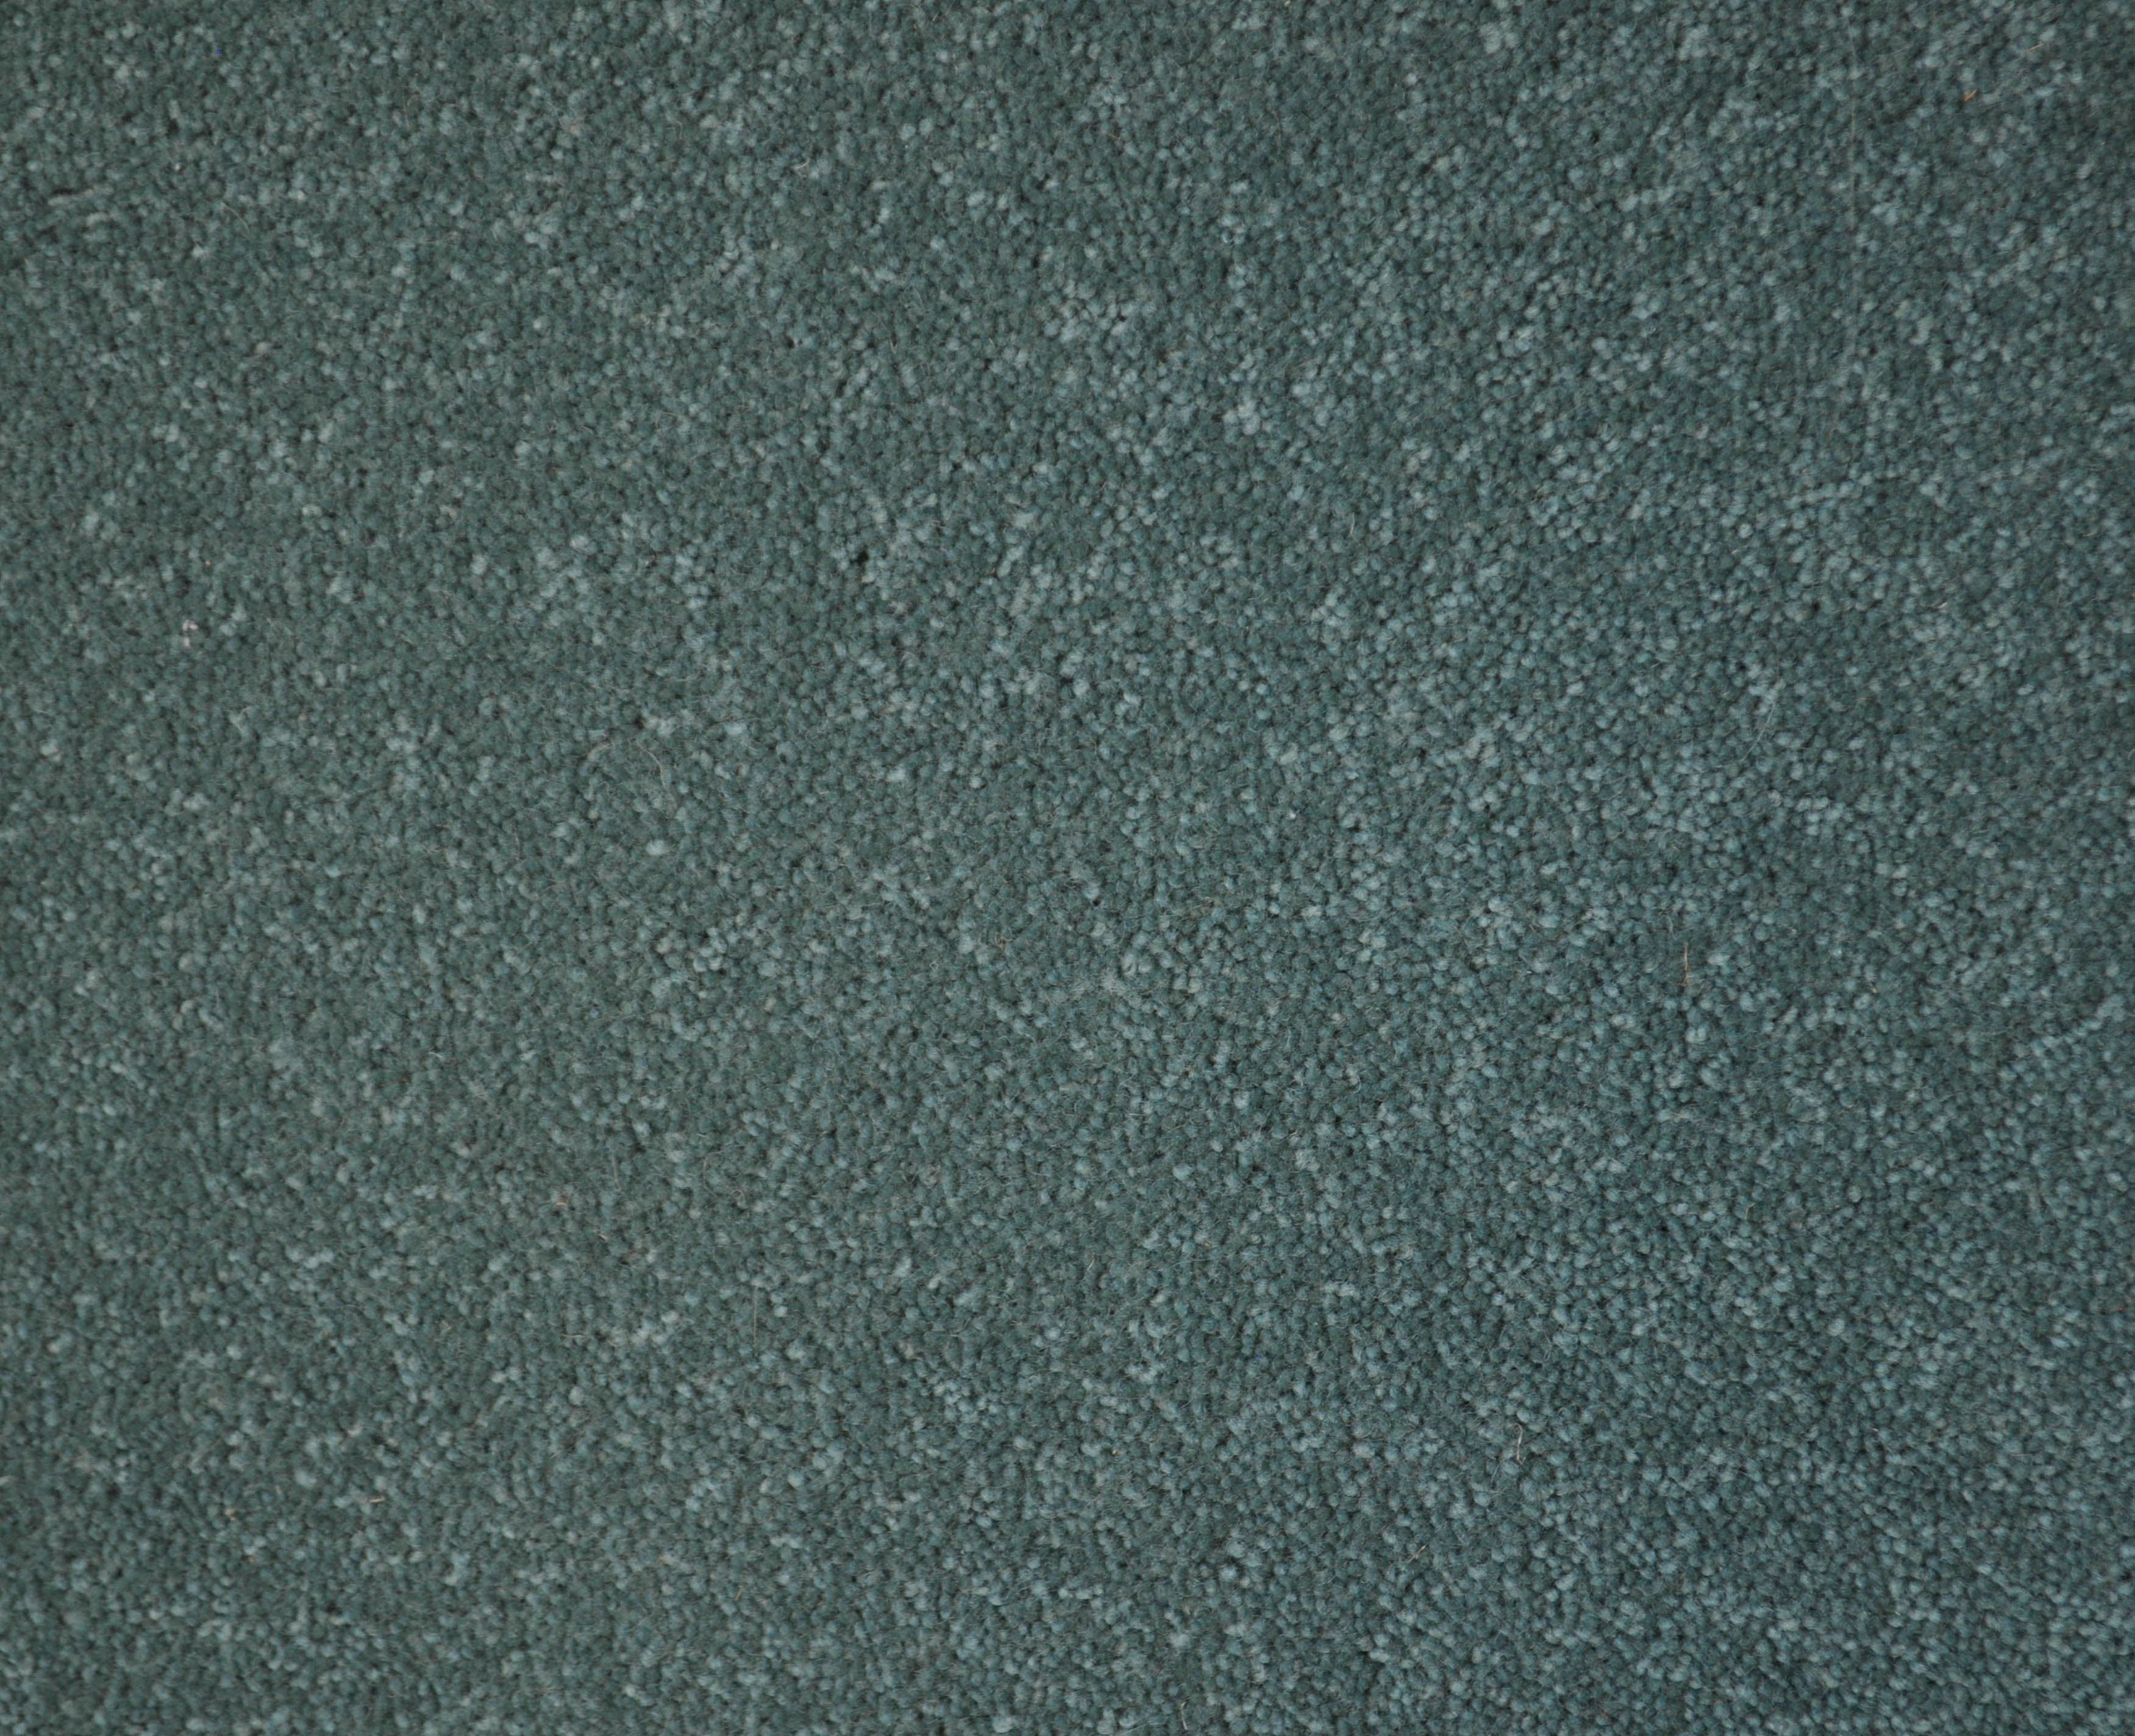 carpet range: ANDEAN HEIGHTS color: bud green, wool fibre, twist, medium green color, on sale at Concord Floors.